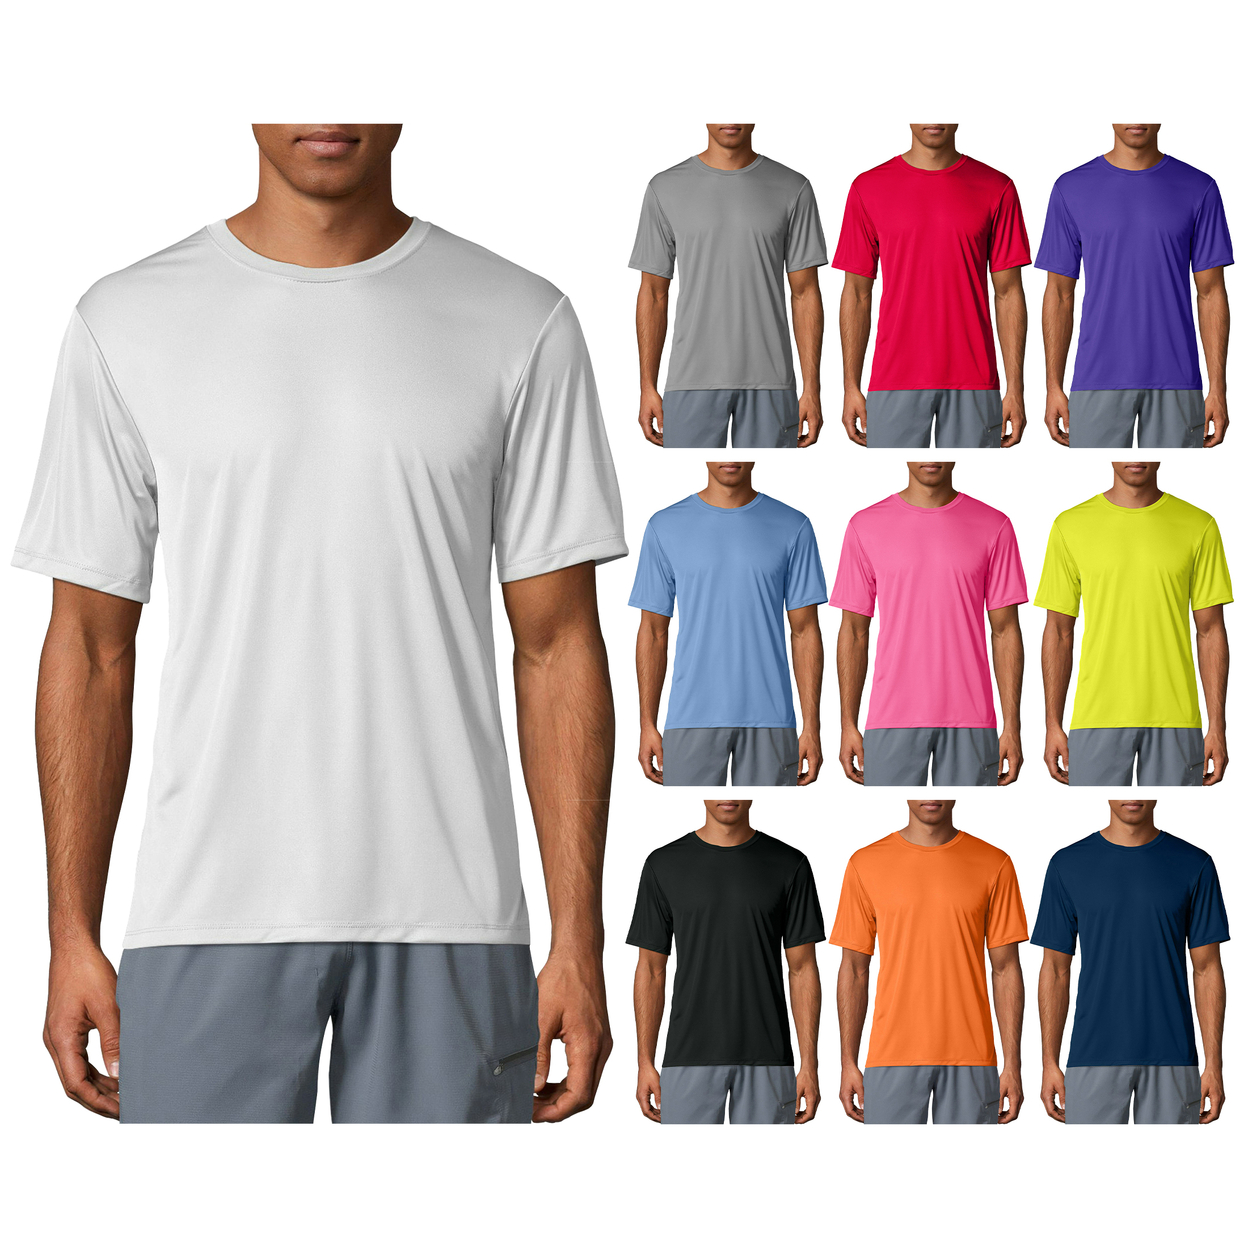 5-Pack: Men's Moisture Wicking Cool Dri-Fit Performance Short Sleeve Crew Neck T-Shirts - Large